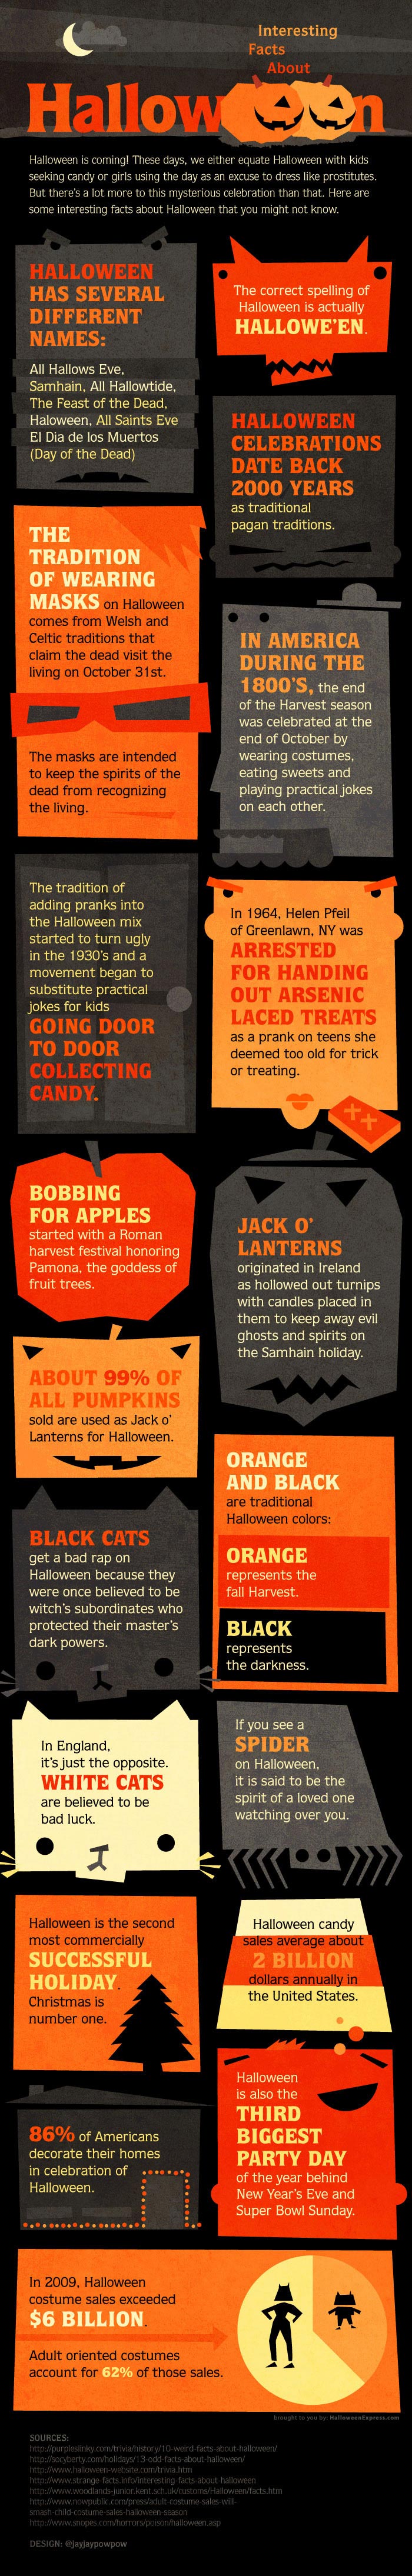 facts-about-halloween